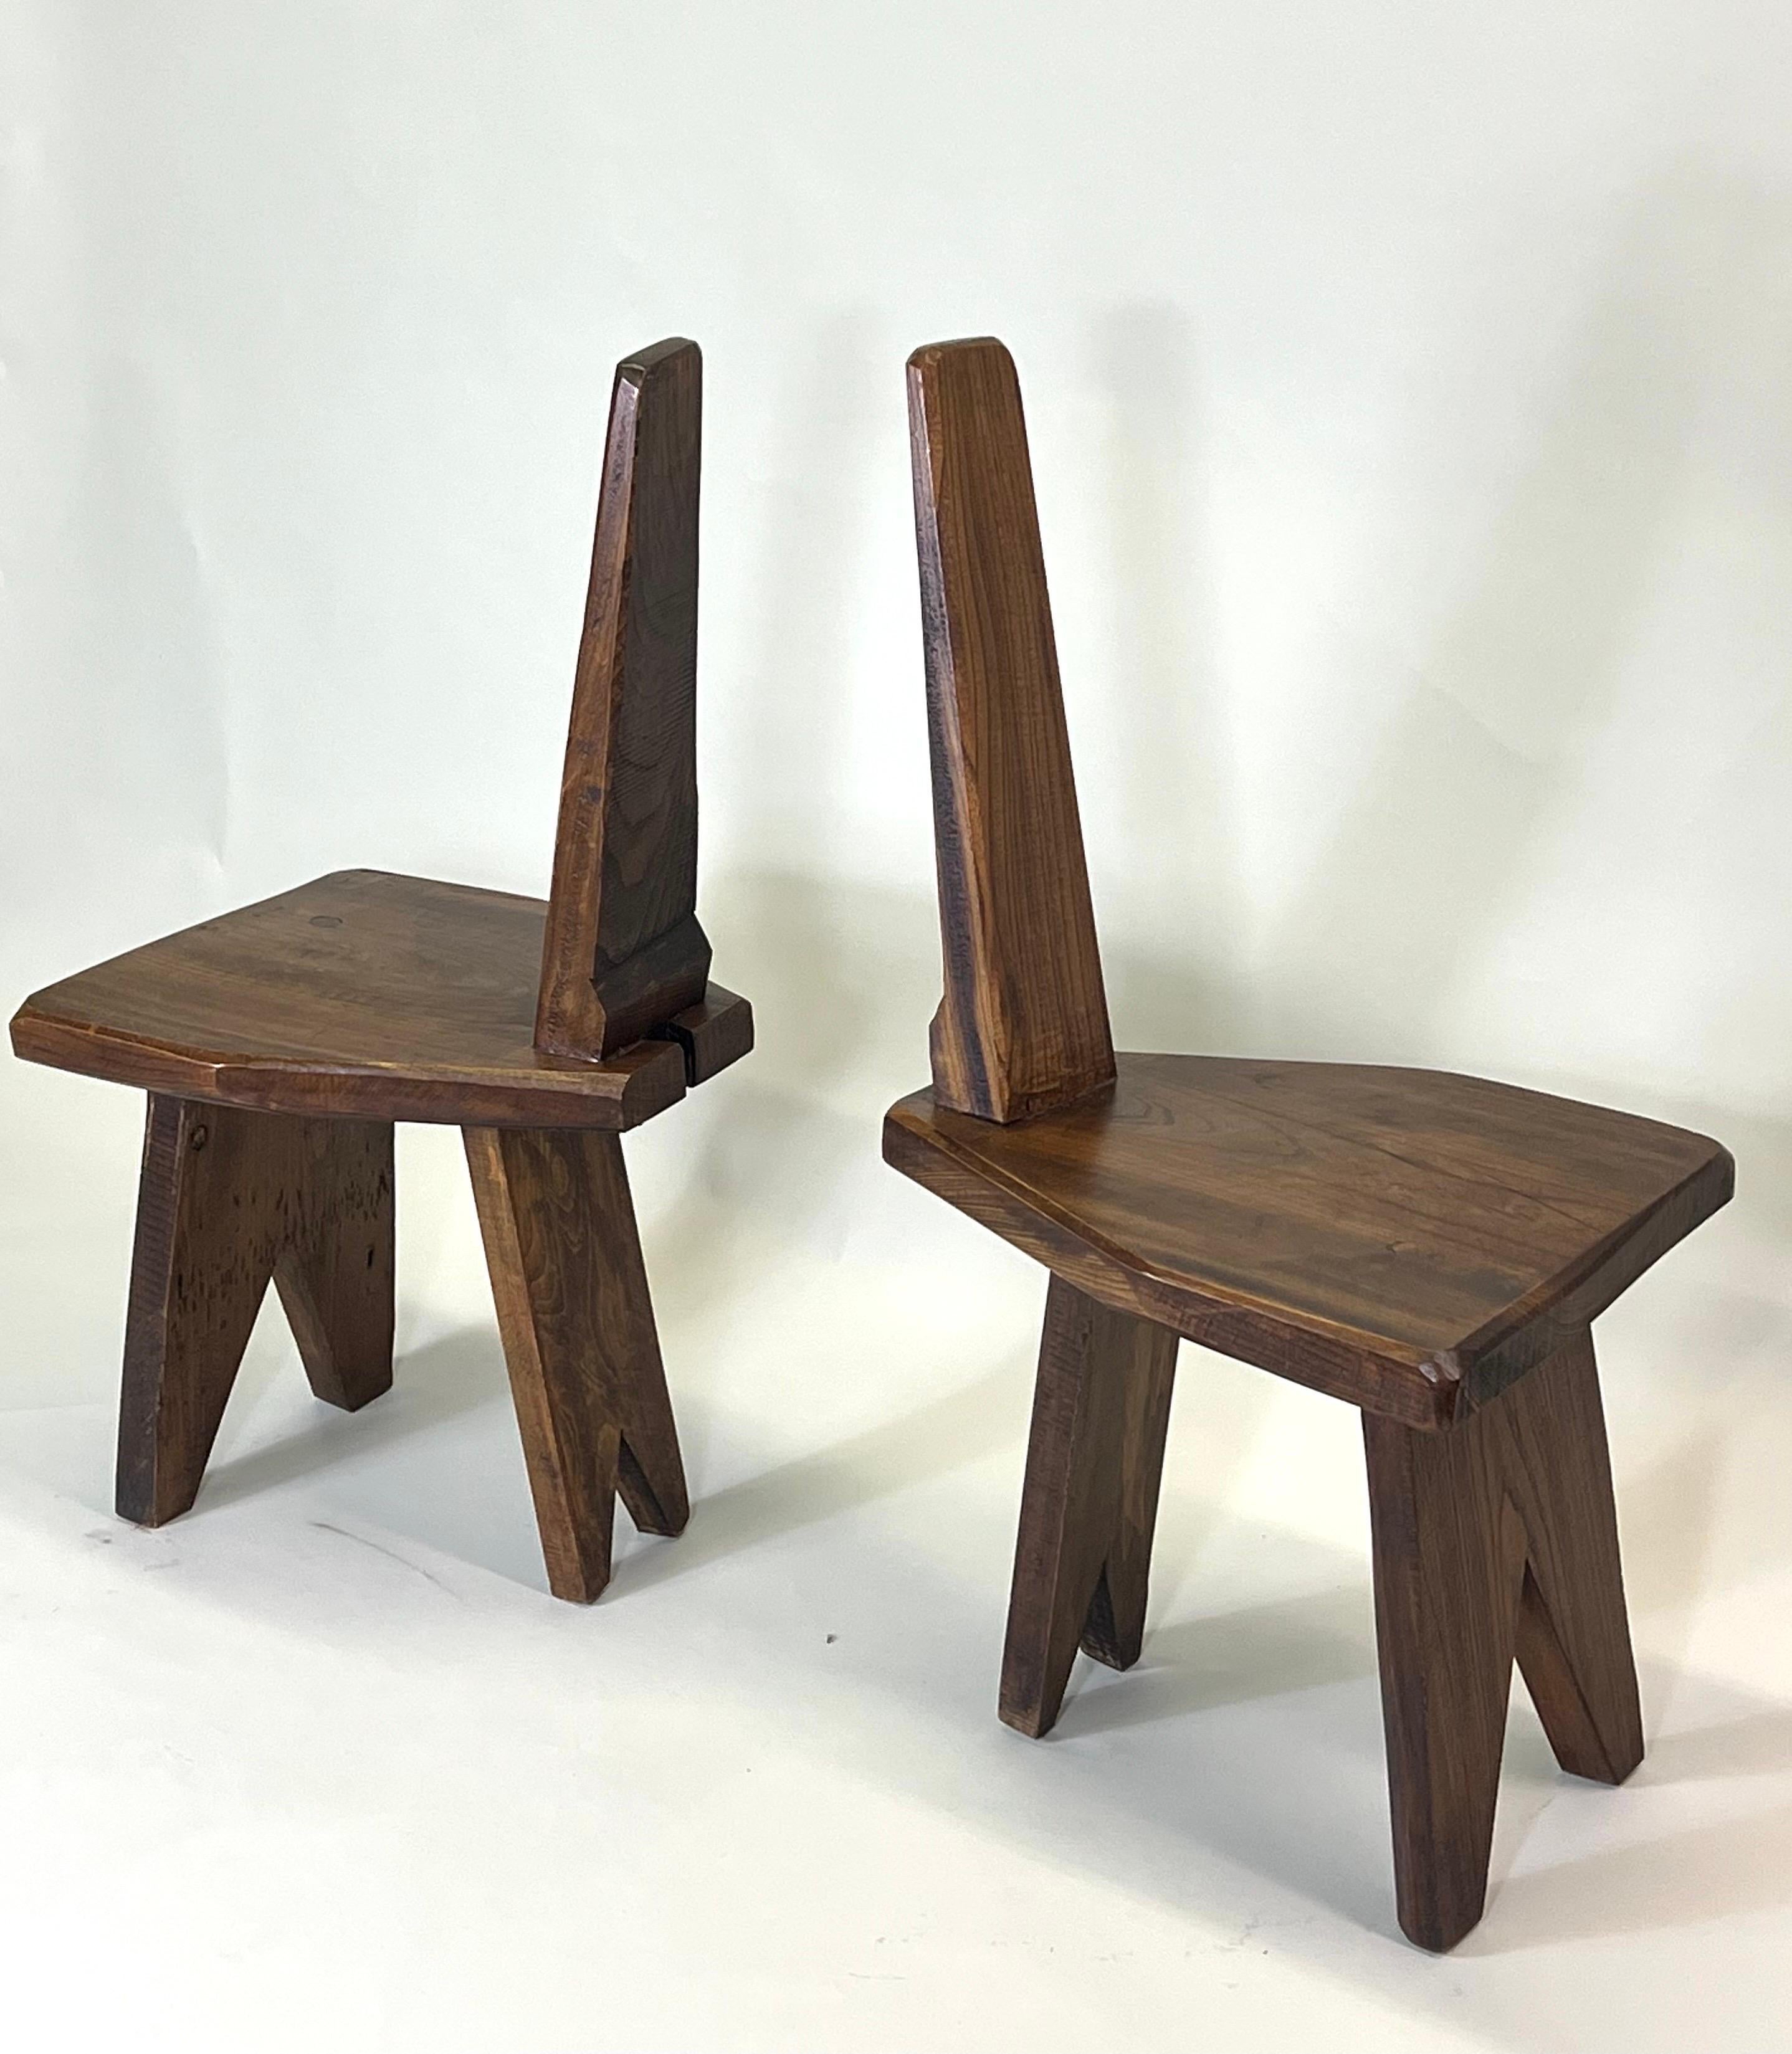 Rare Pair of French Mid-Century Modern Craftsman Wood Chairs, Pierre Jeanneret In Good Condition For Sale In New York, NY